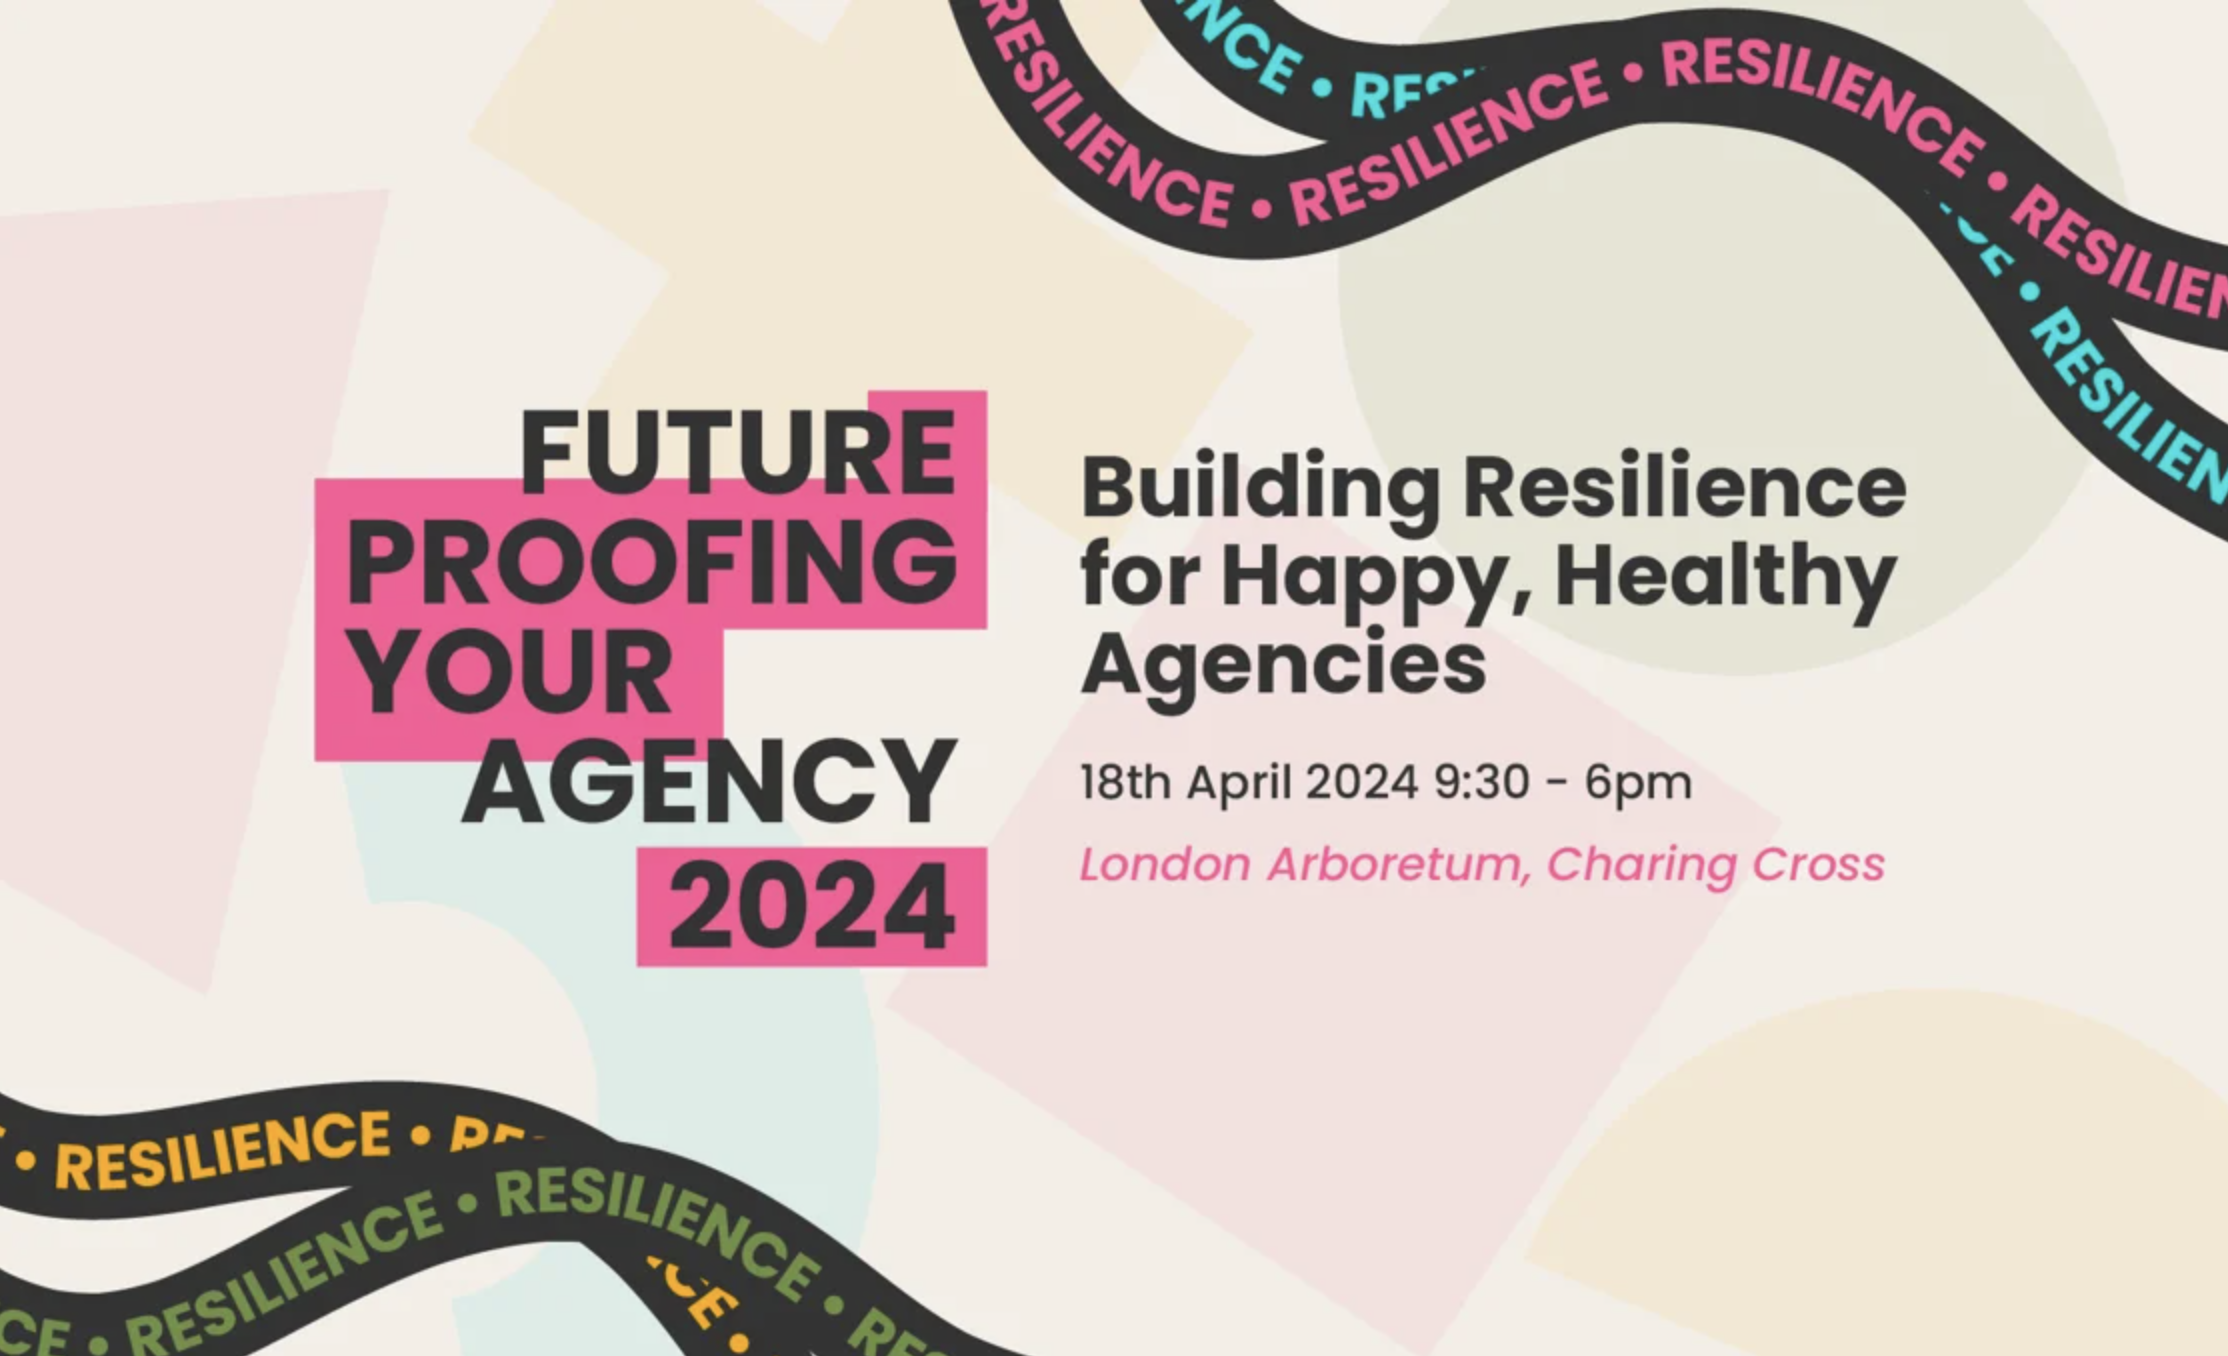 Future Proofing Your Agency 2024